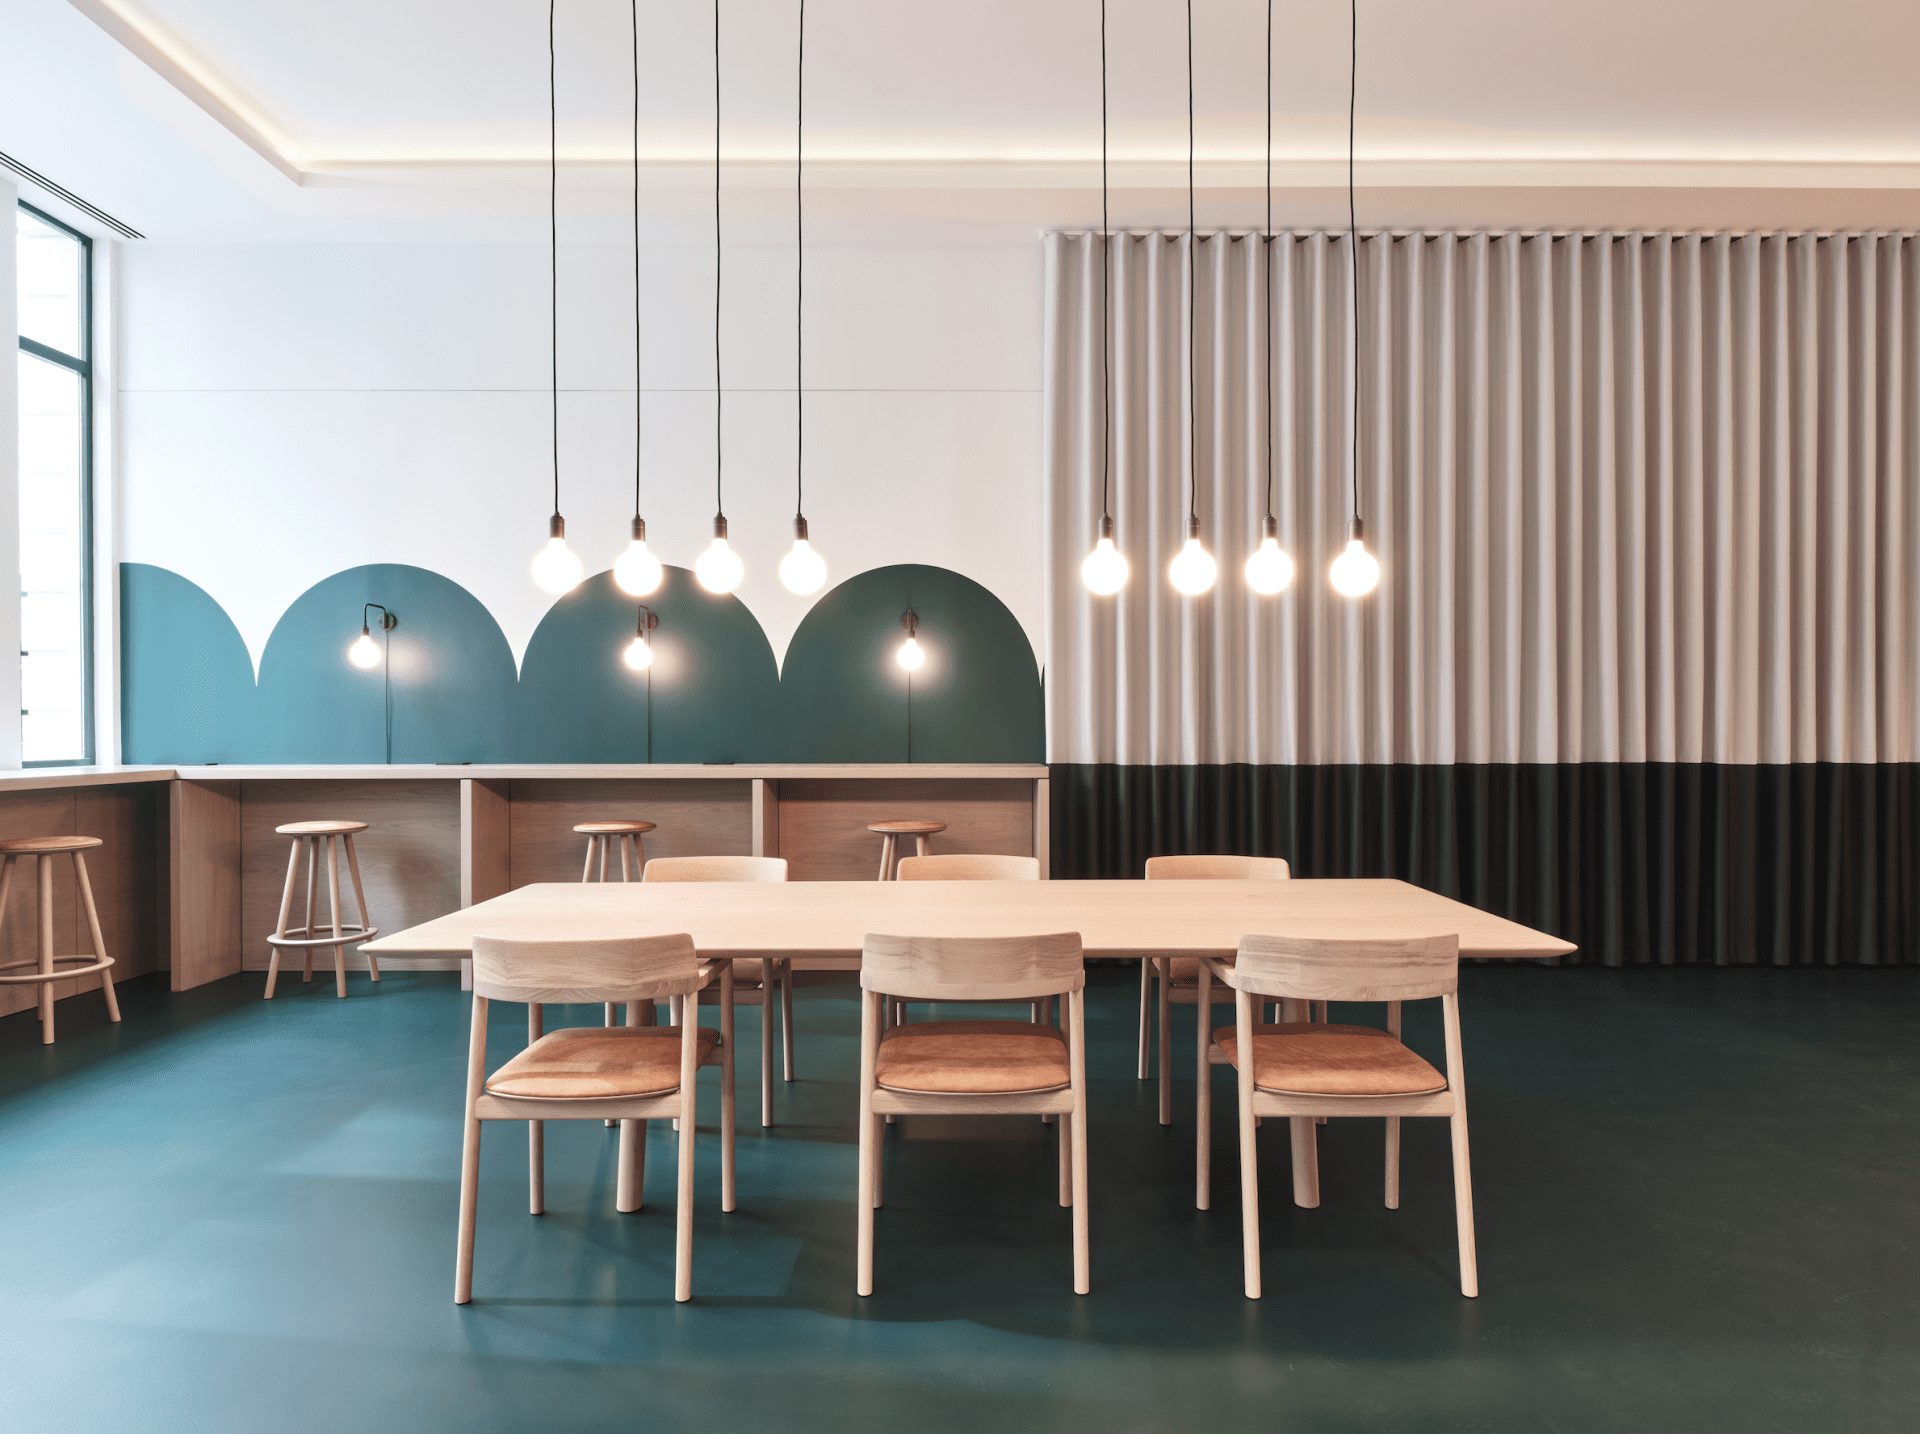 A modern workspace design inspired by London's historic Covent Garden